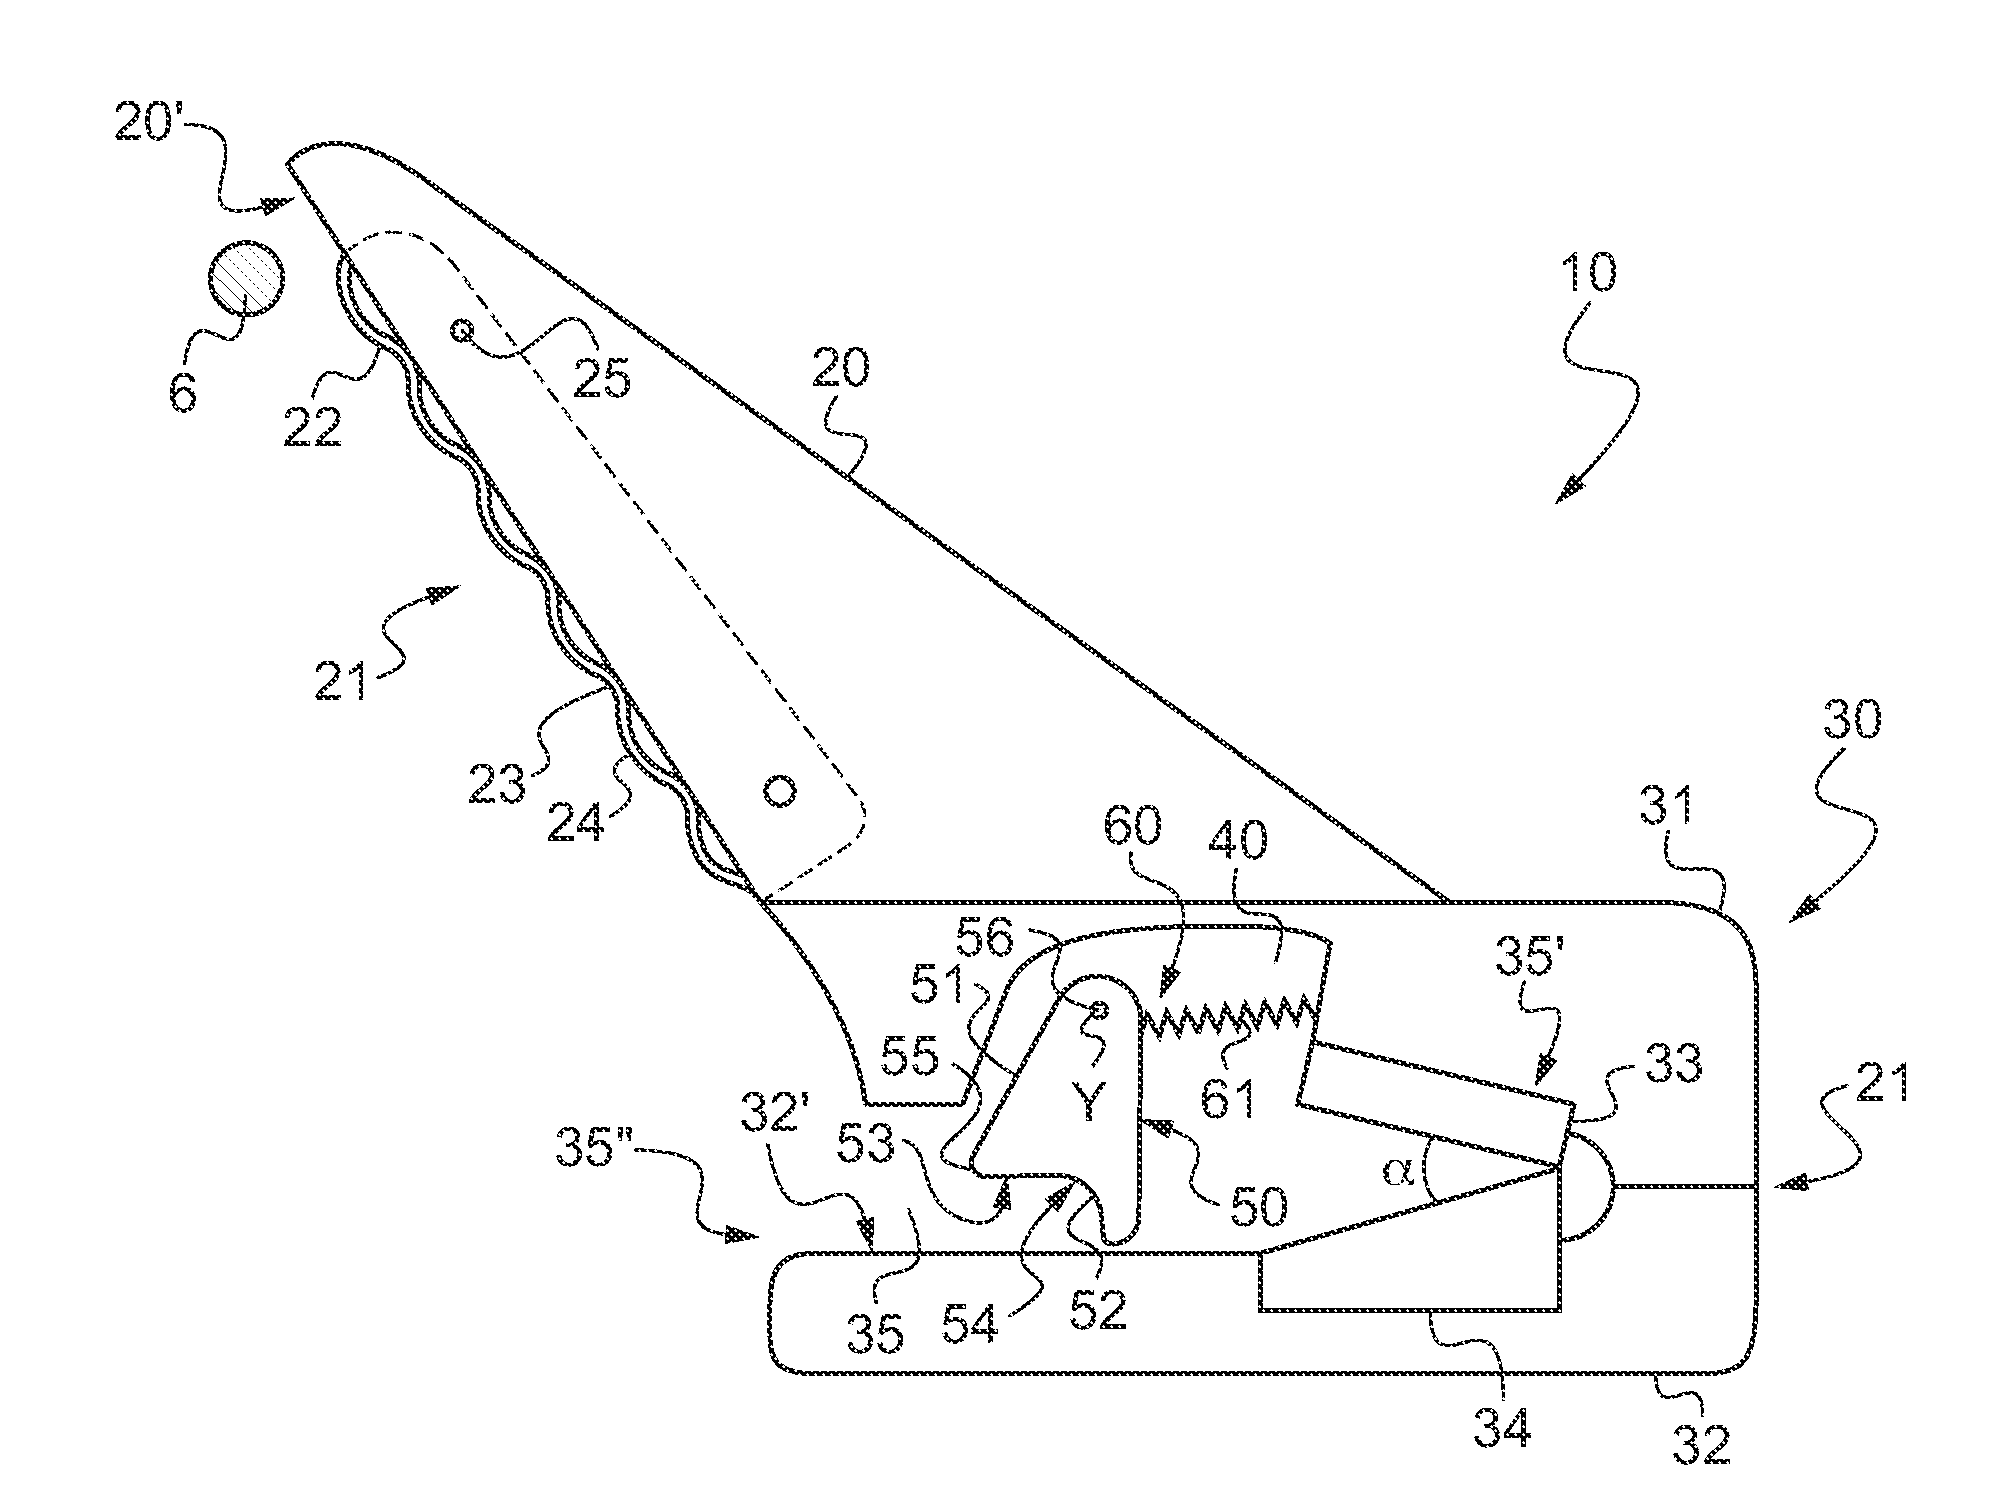 Cable-cutter device